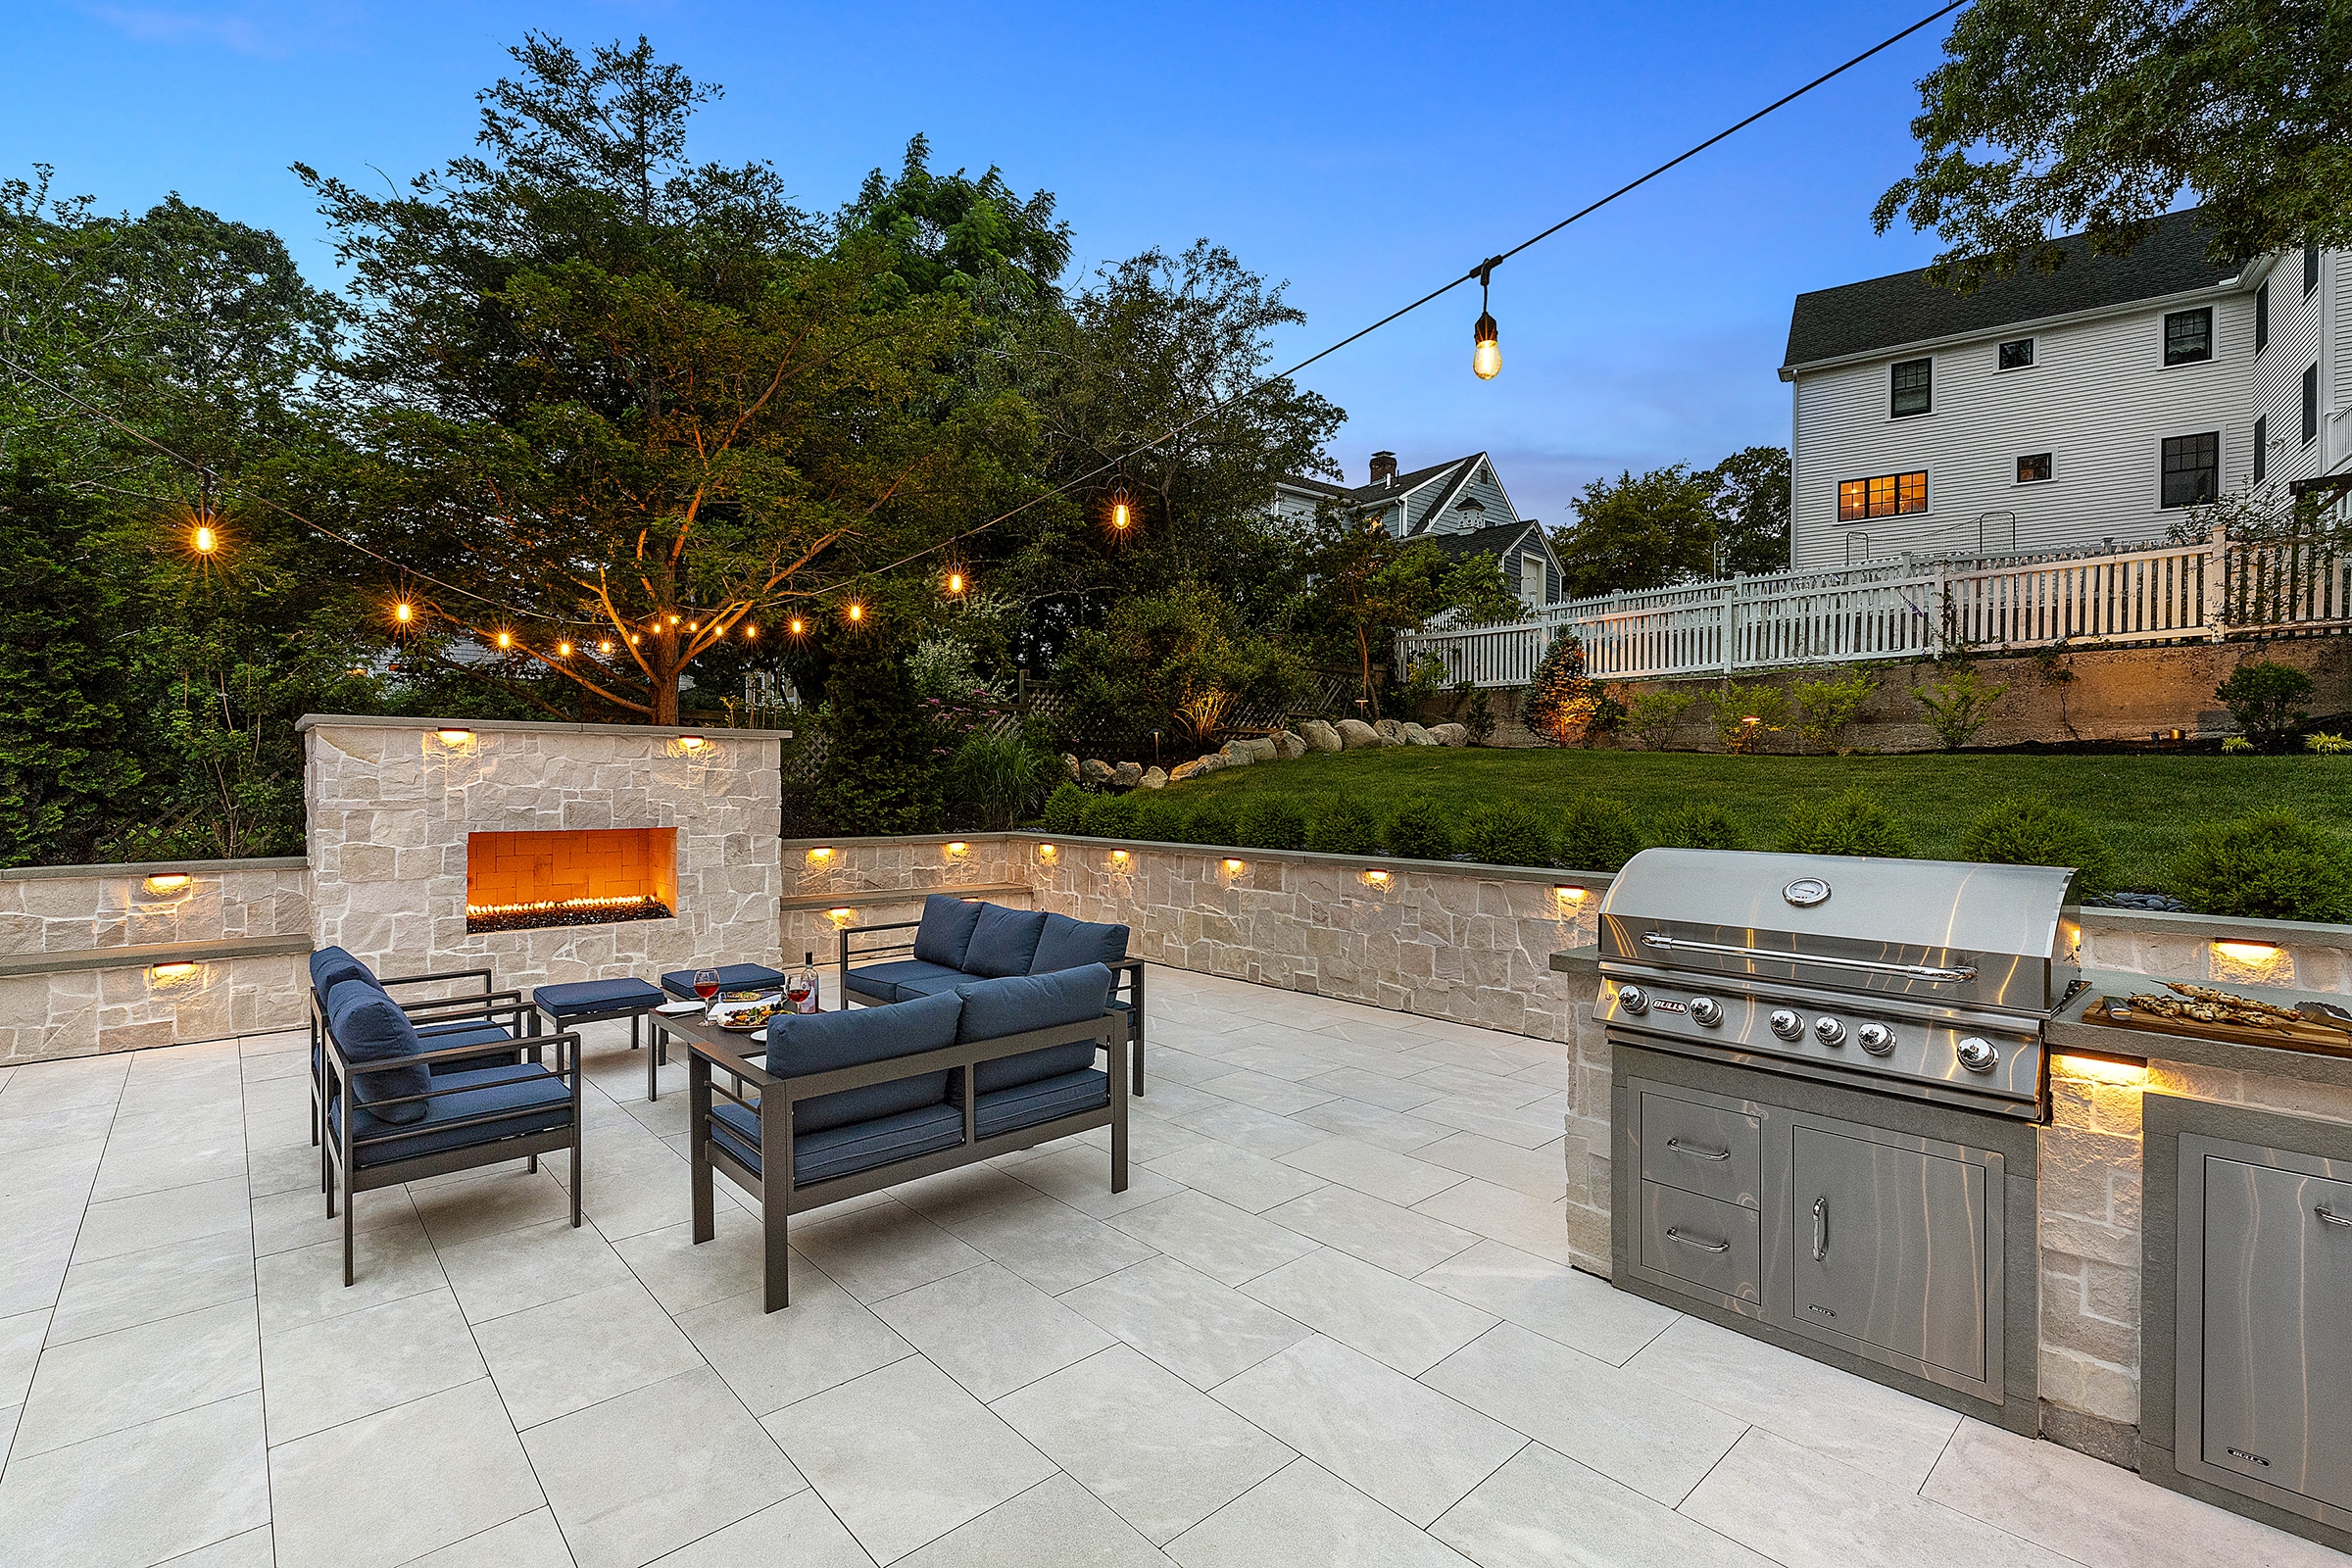 Outdoor fireplace, patio furniture, and a stainless steel gas grill on a natural stone paver patio.